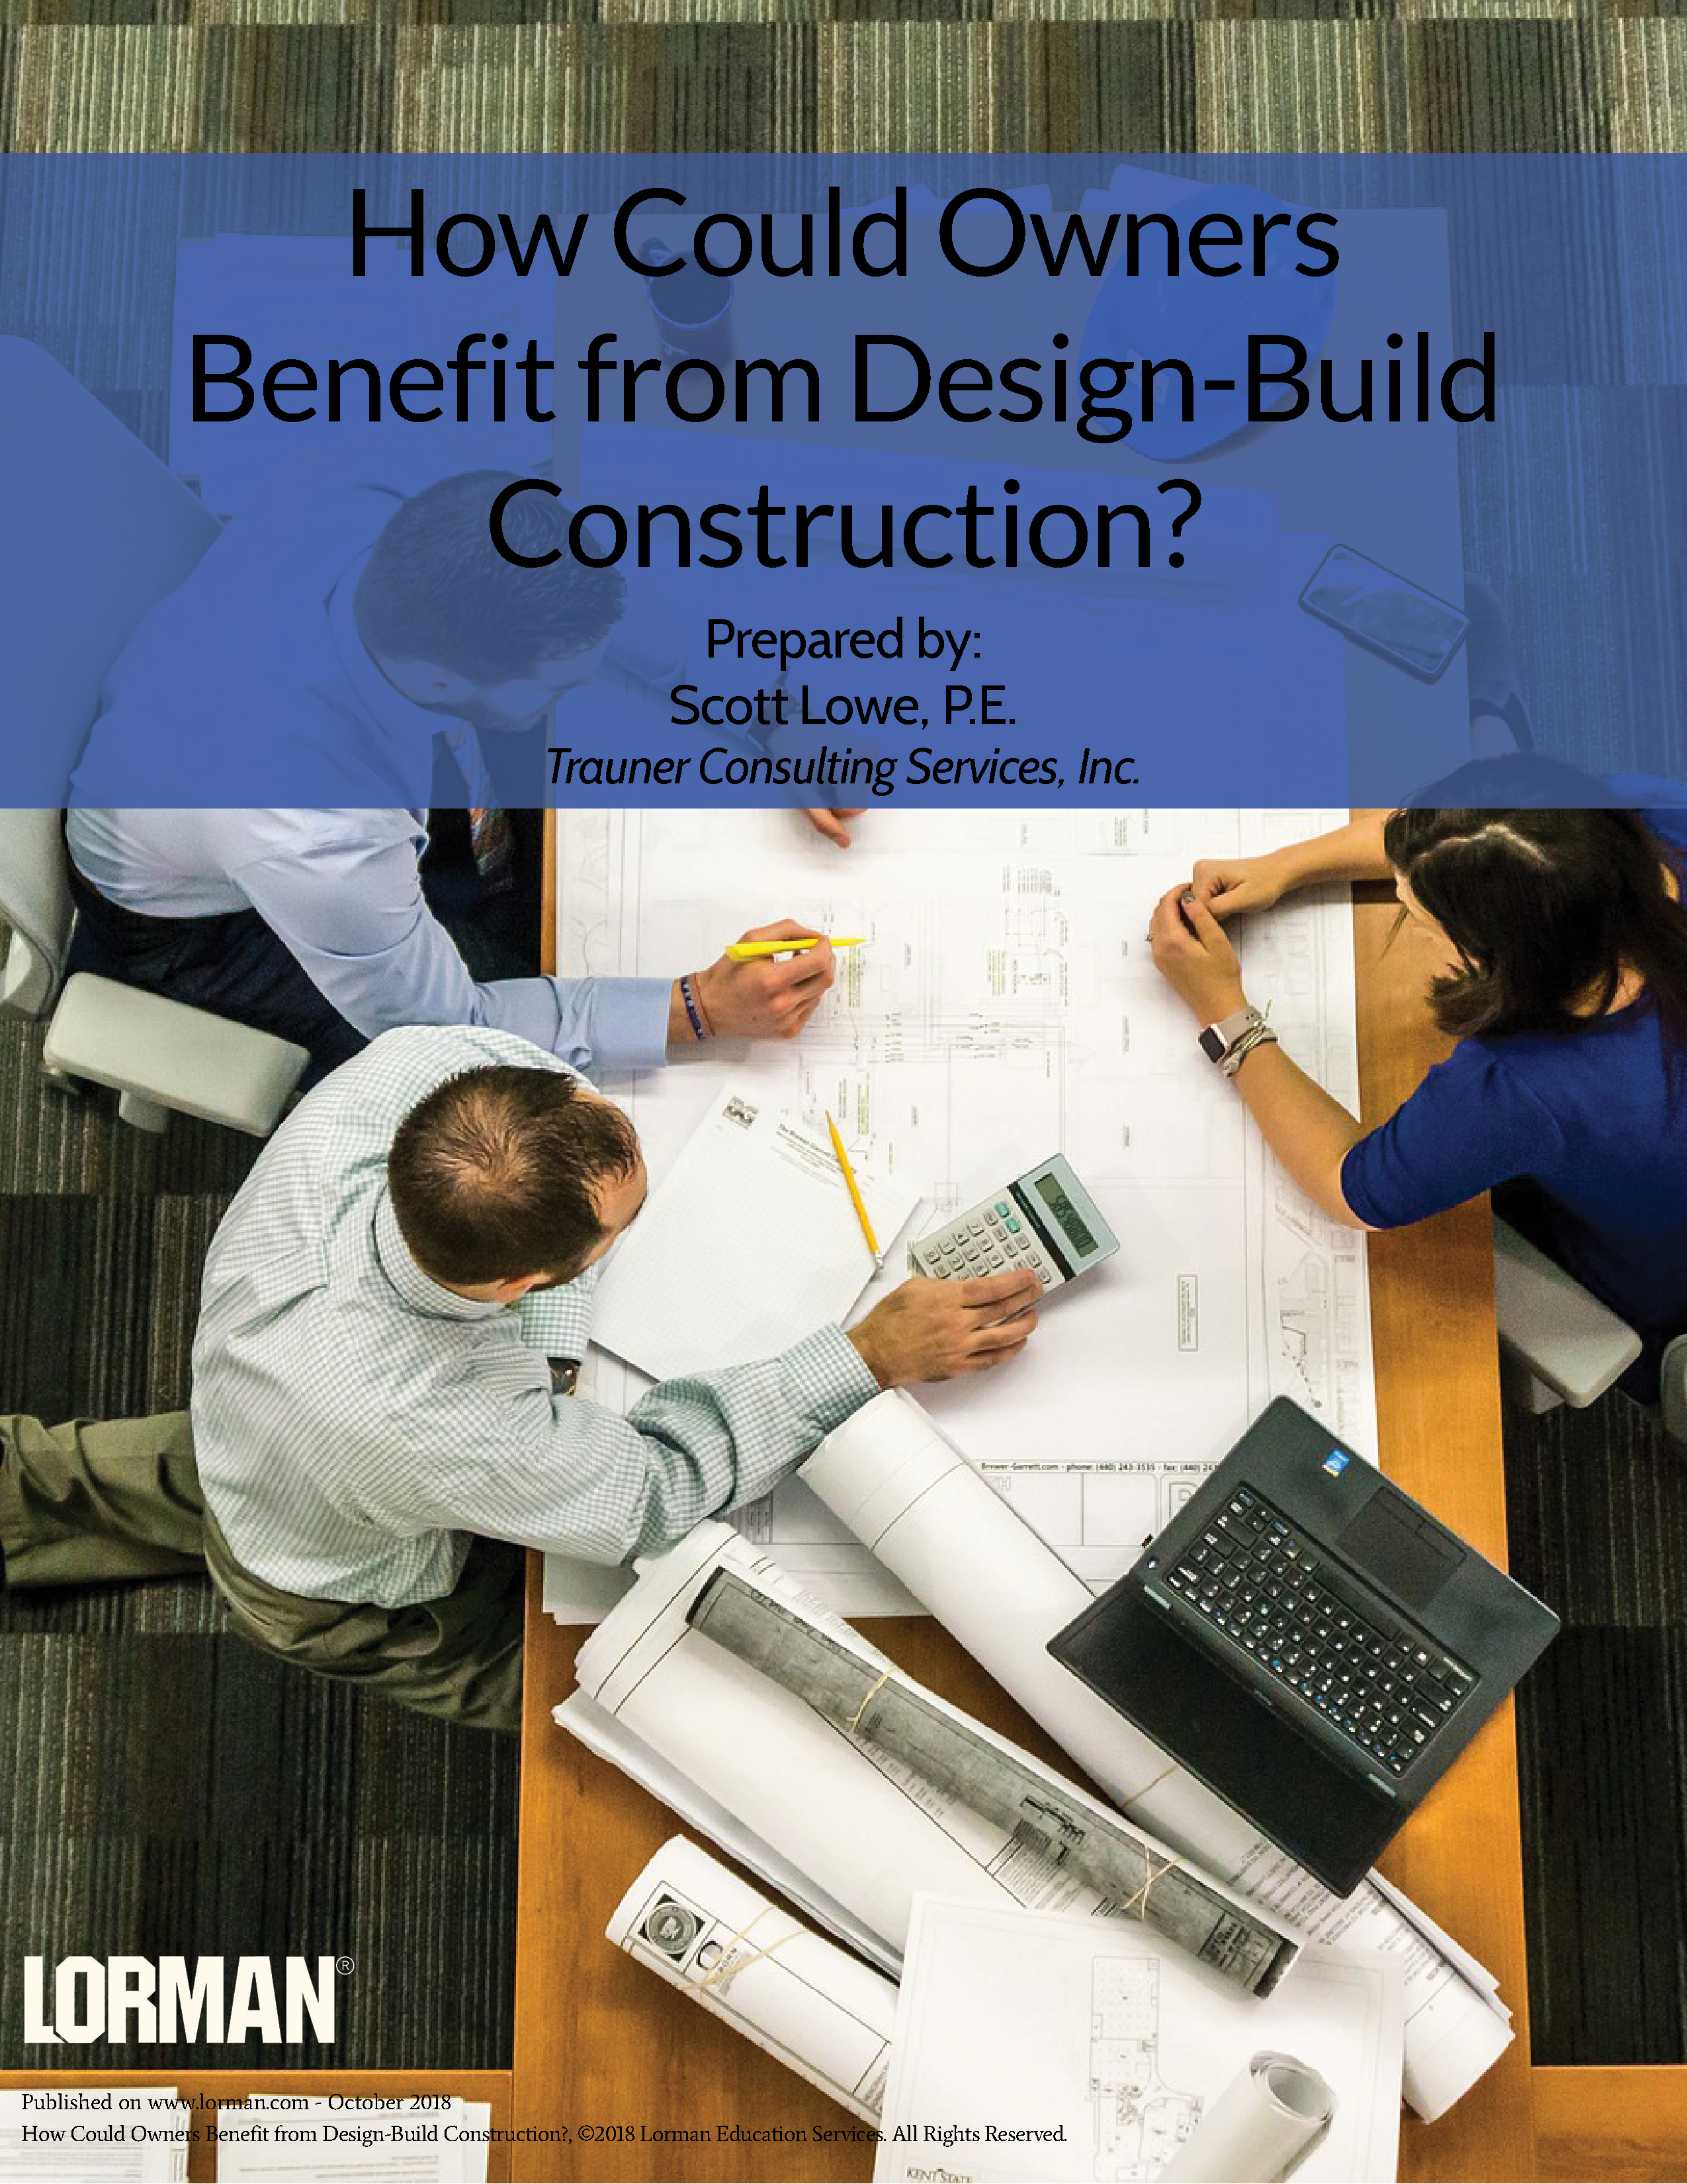 How Could Owners Benefit from Design-Build Construction?